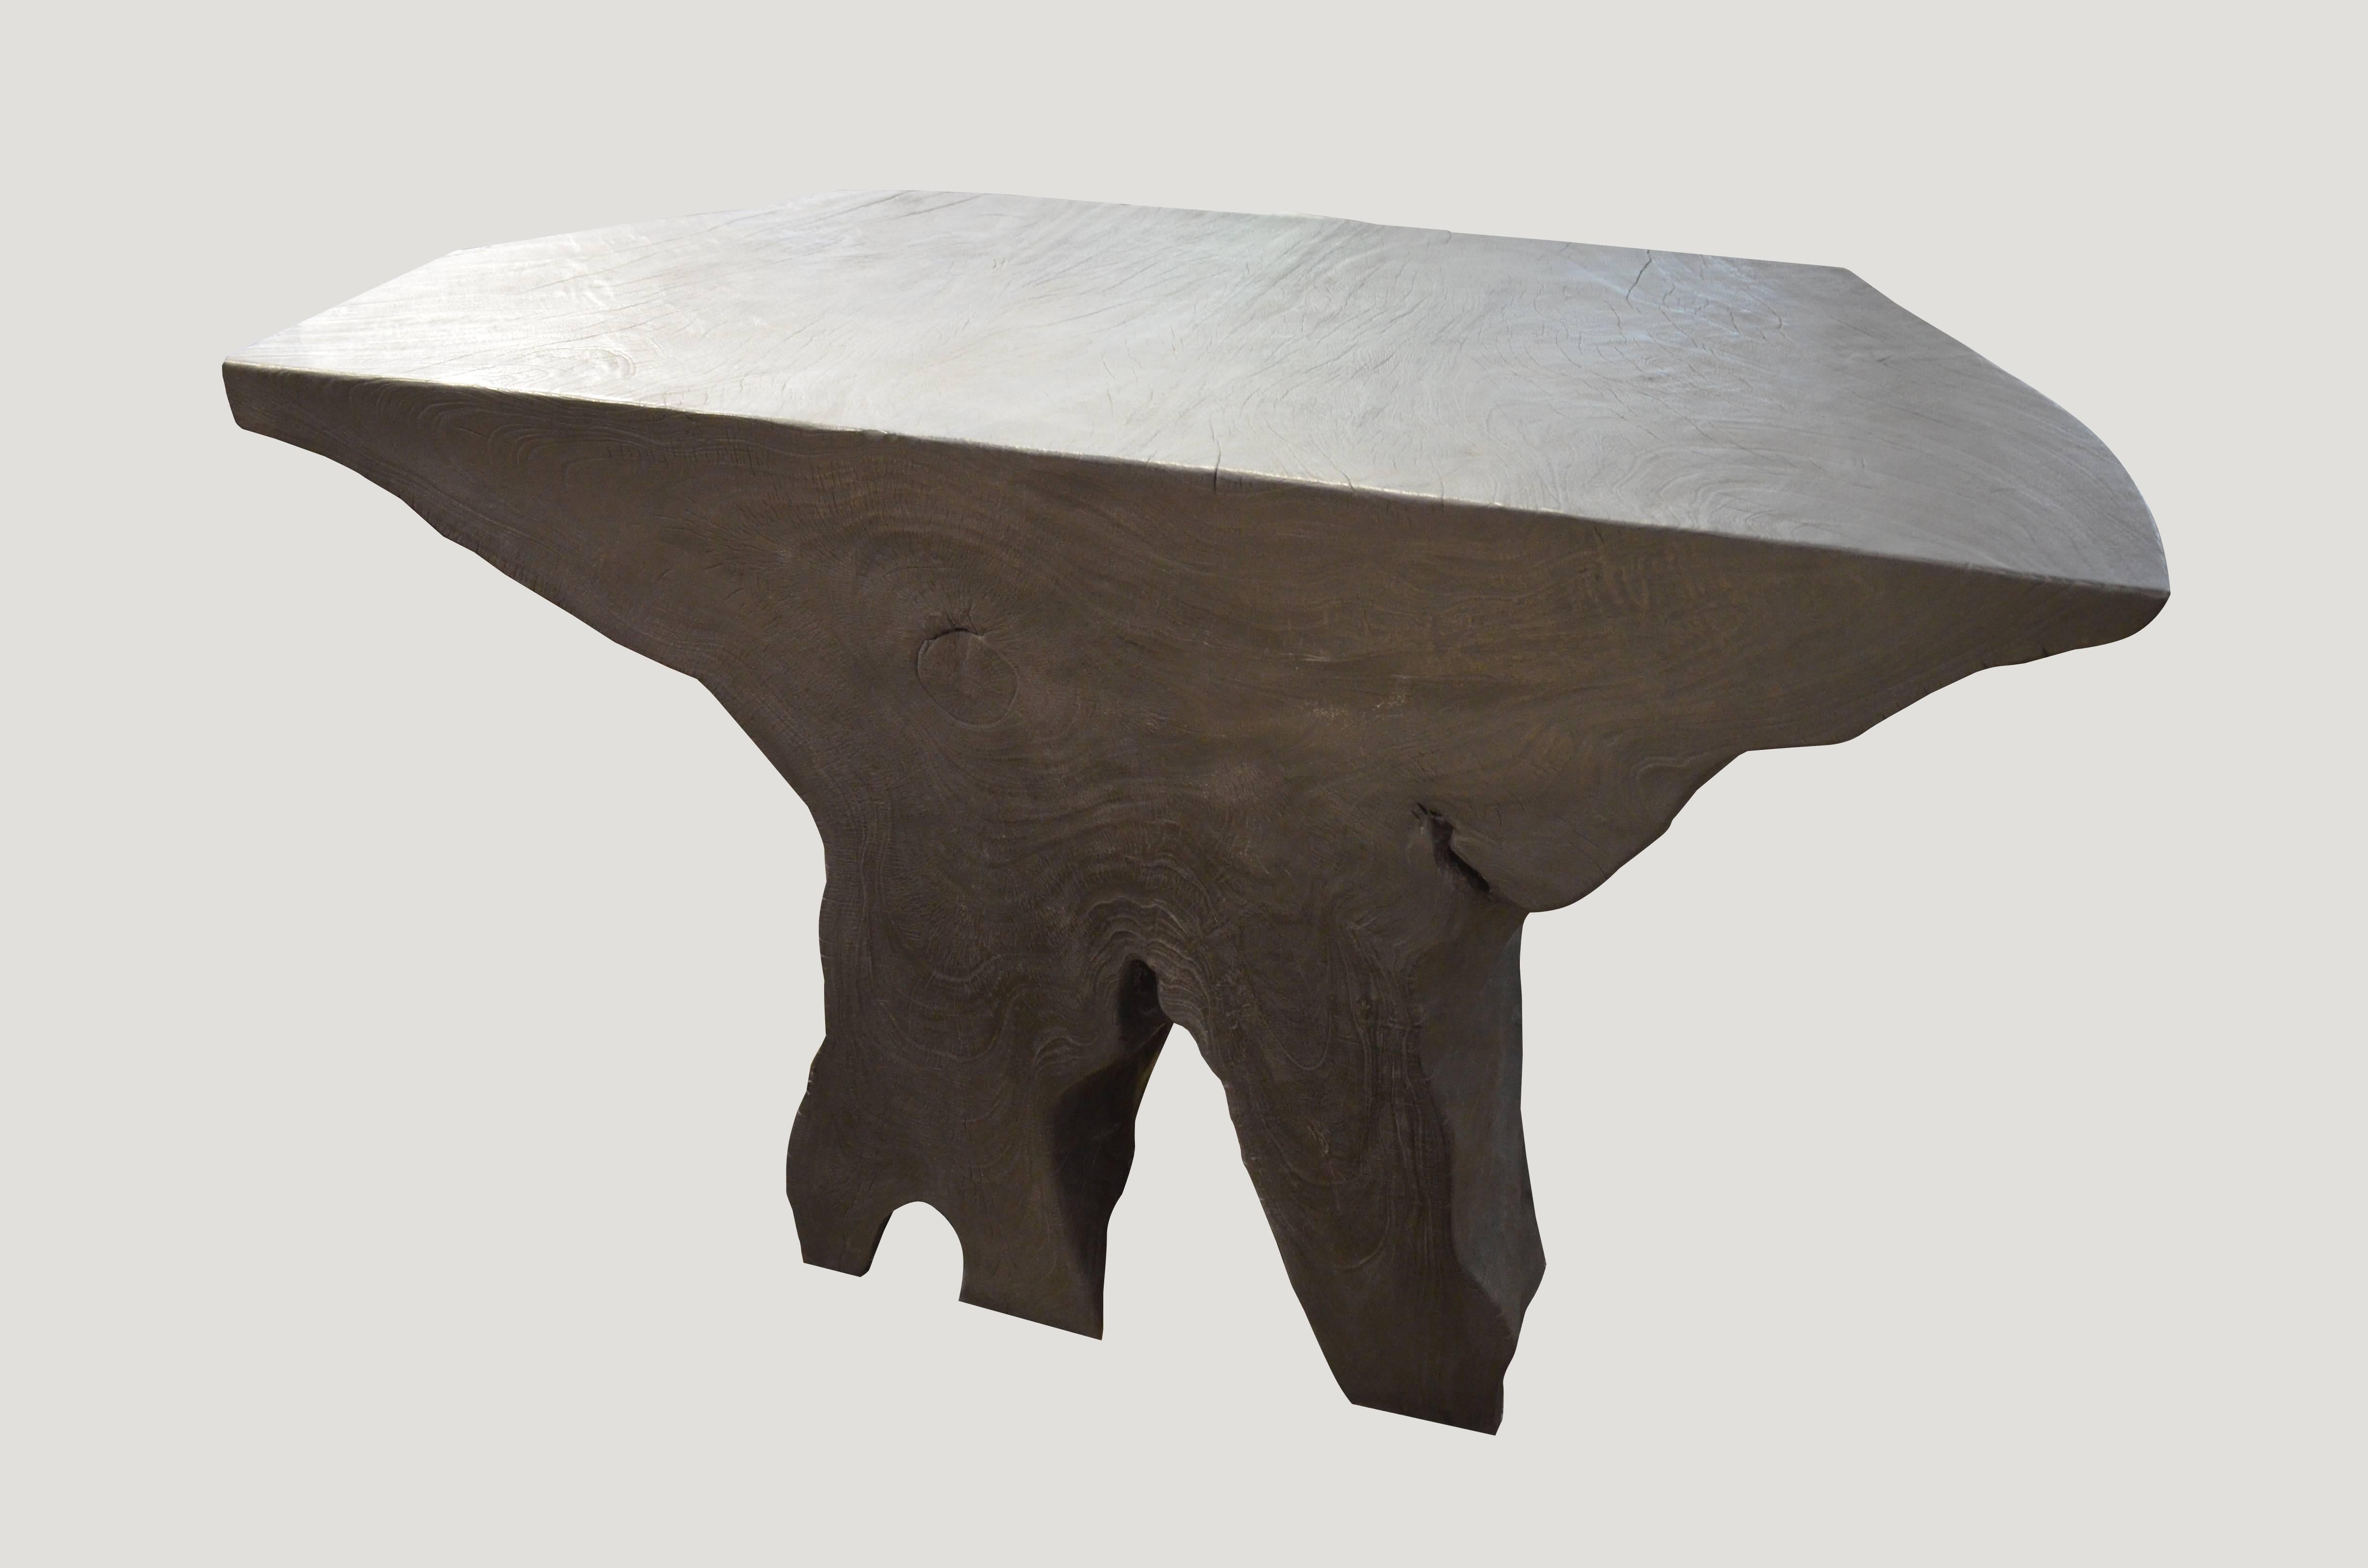 Impressive single reclaimed mahoni wood root, carved into a stunning organic shaped console which can also be turned and used as a coffee table.

The Triple Burnt Ccllection represents a unique line of modern furniture made from solid organic